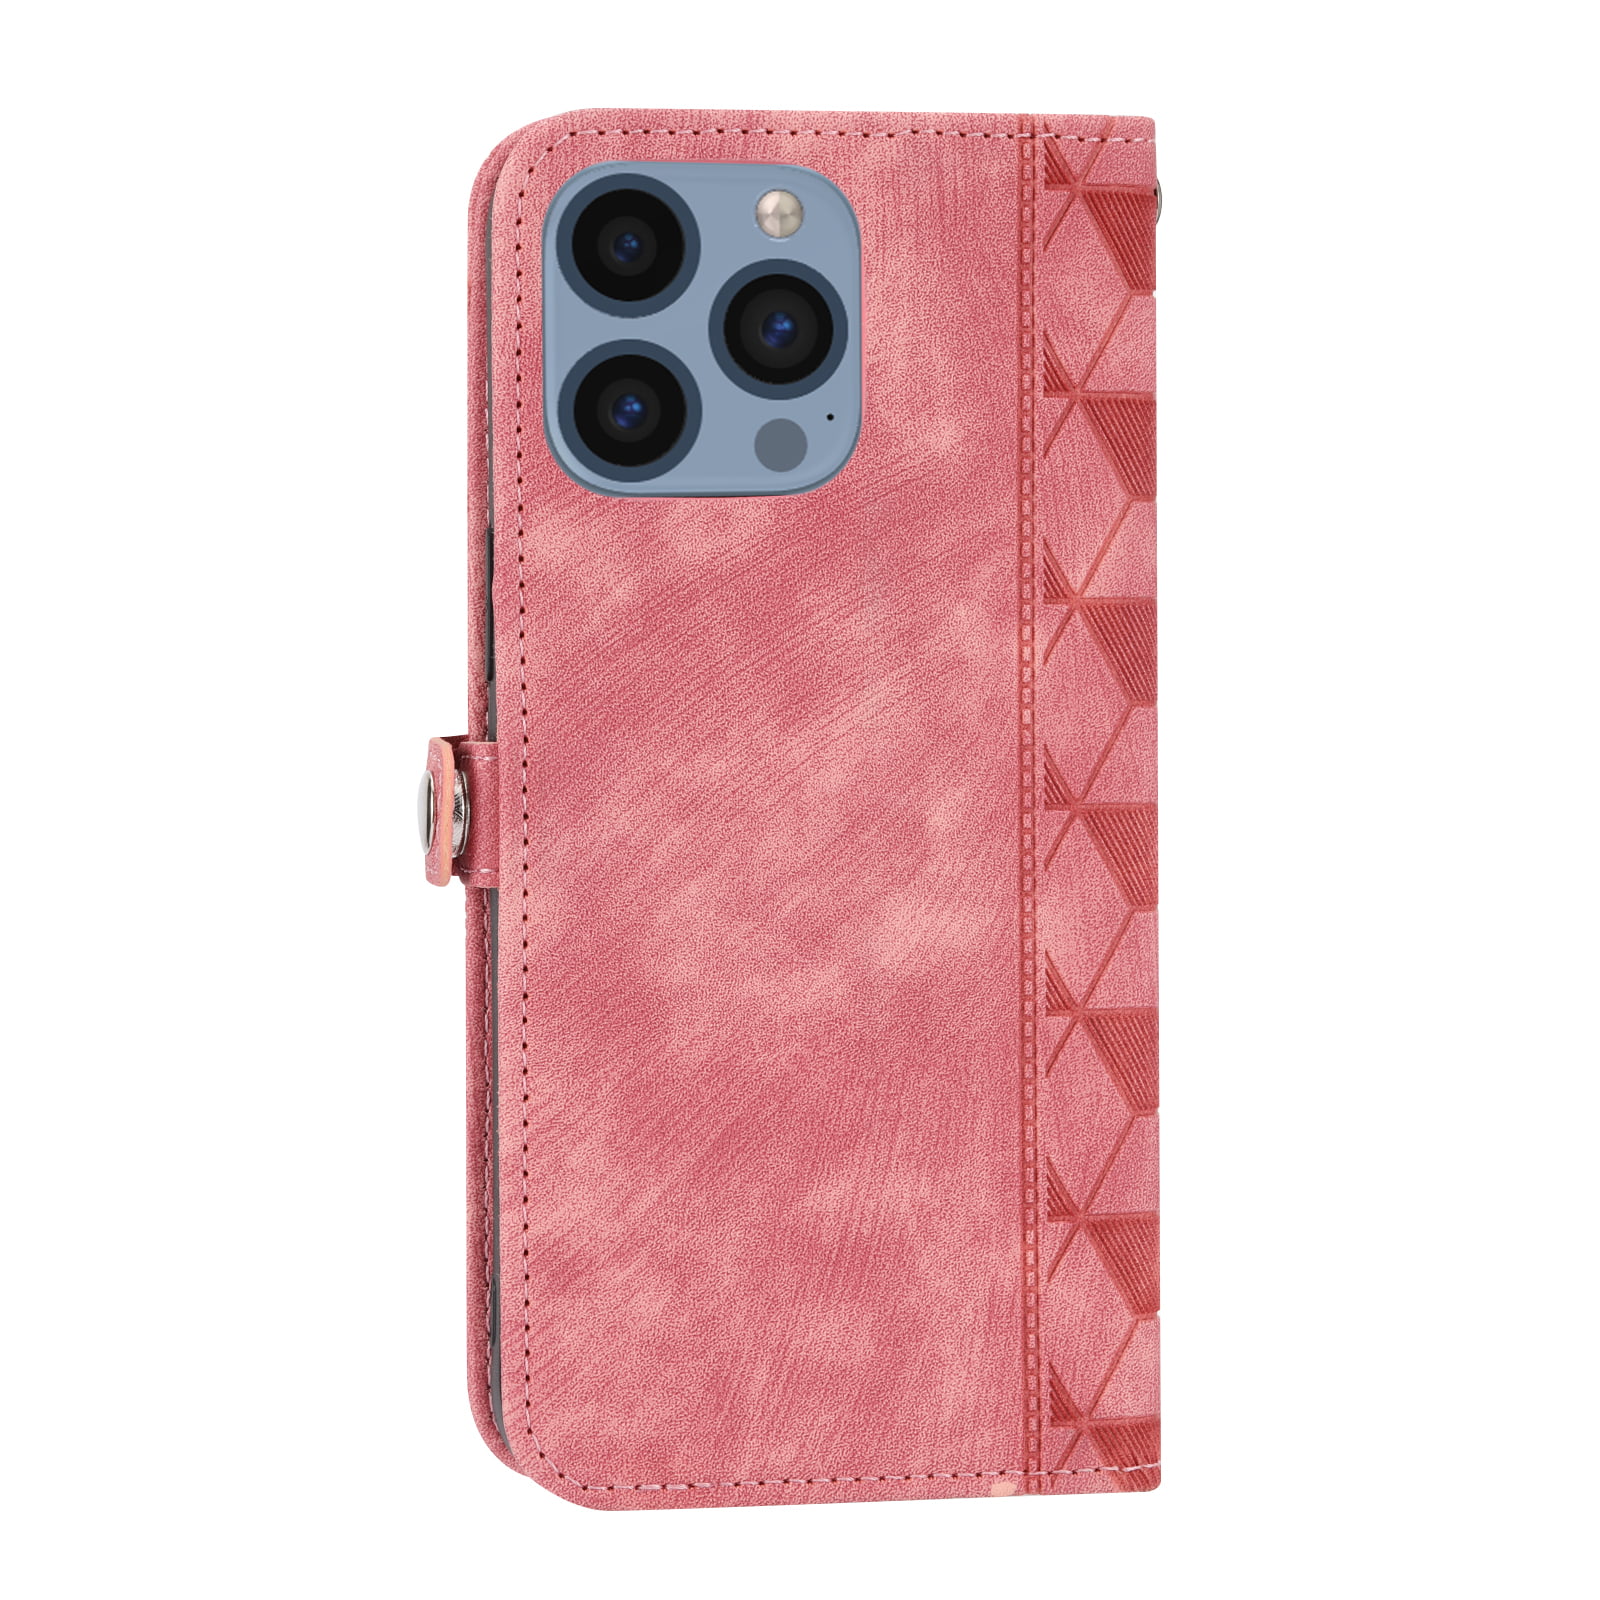 Dteck Wallet Case For iPhone 13 Pro,360 Protection Stylish Cute Spider  embossed Pattern PU Leather Flip Holder Shockproof Rugged Cover with  Detachable Wrist Strap.For iPhone 13 Pro,Pink 